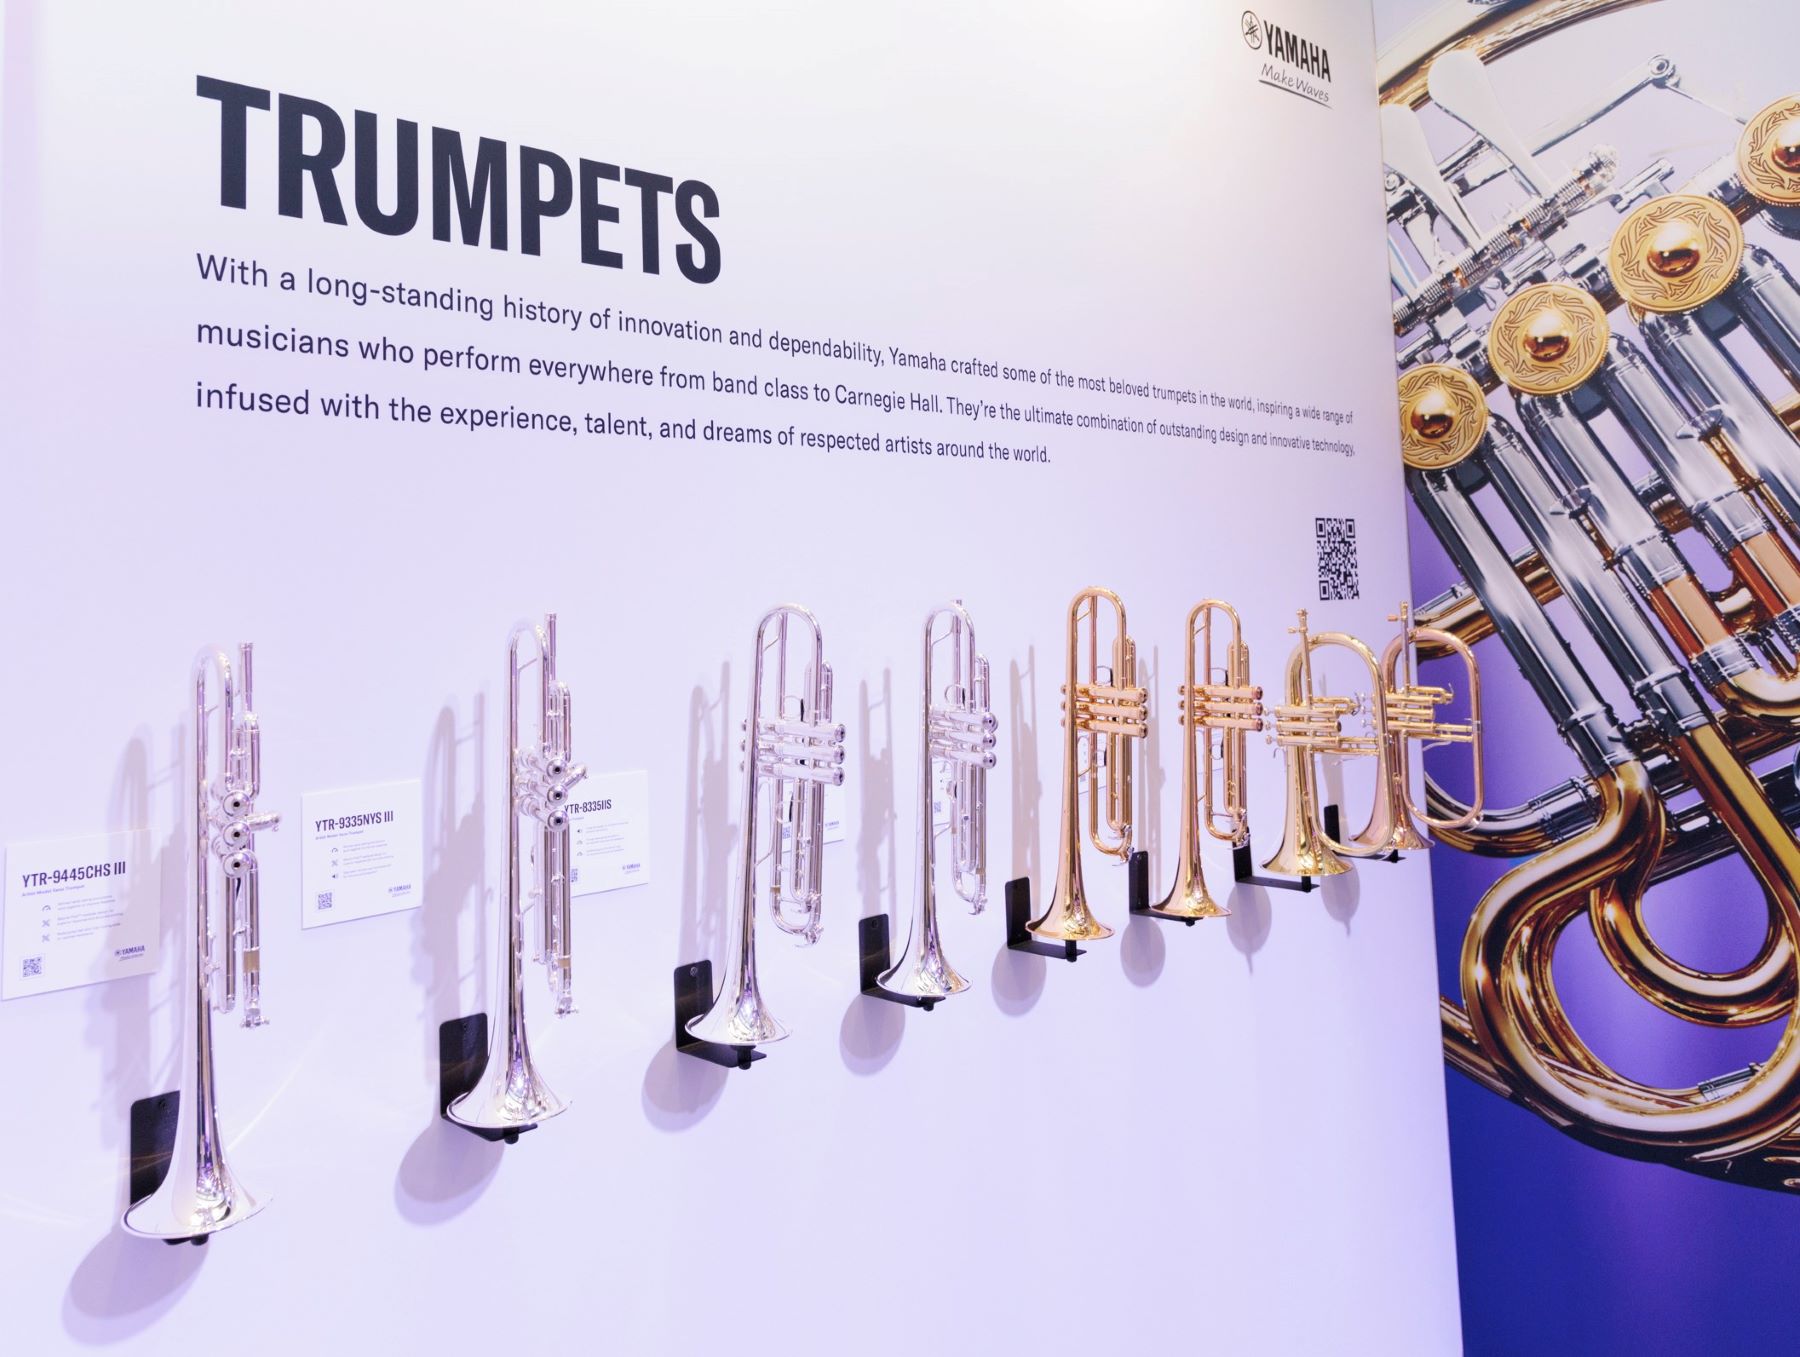 Wall panel with "Trumpets" sign and instruments hanging.